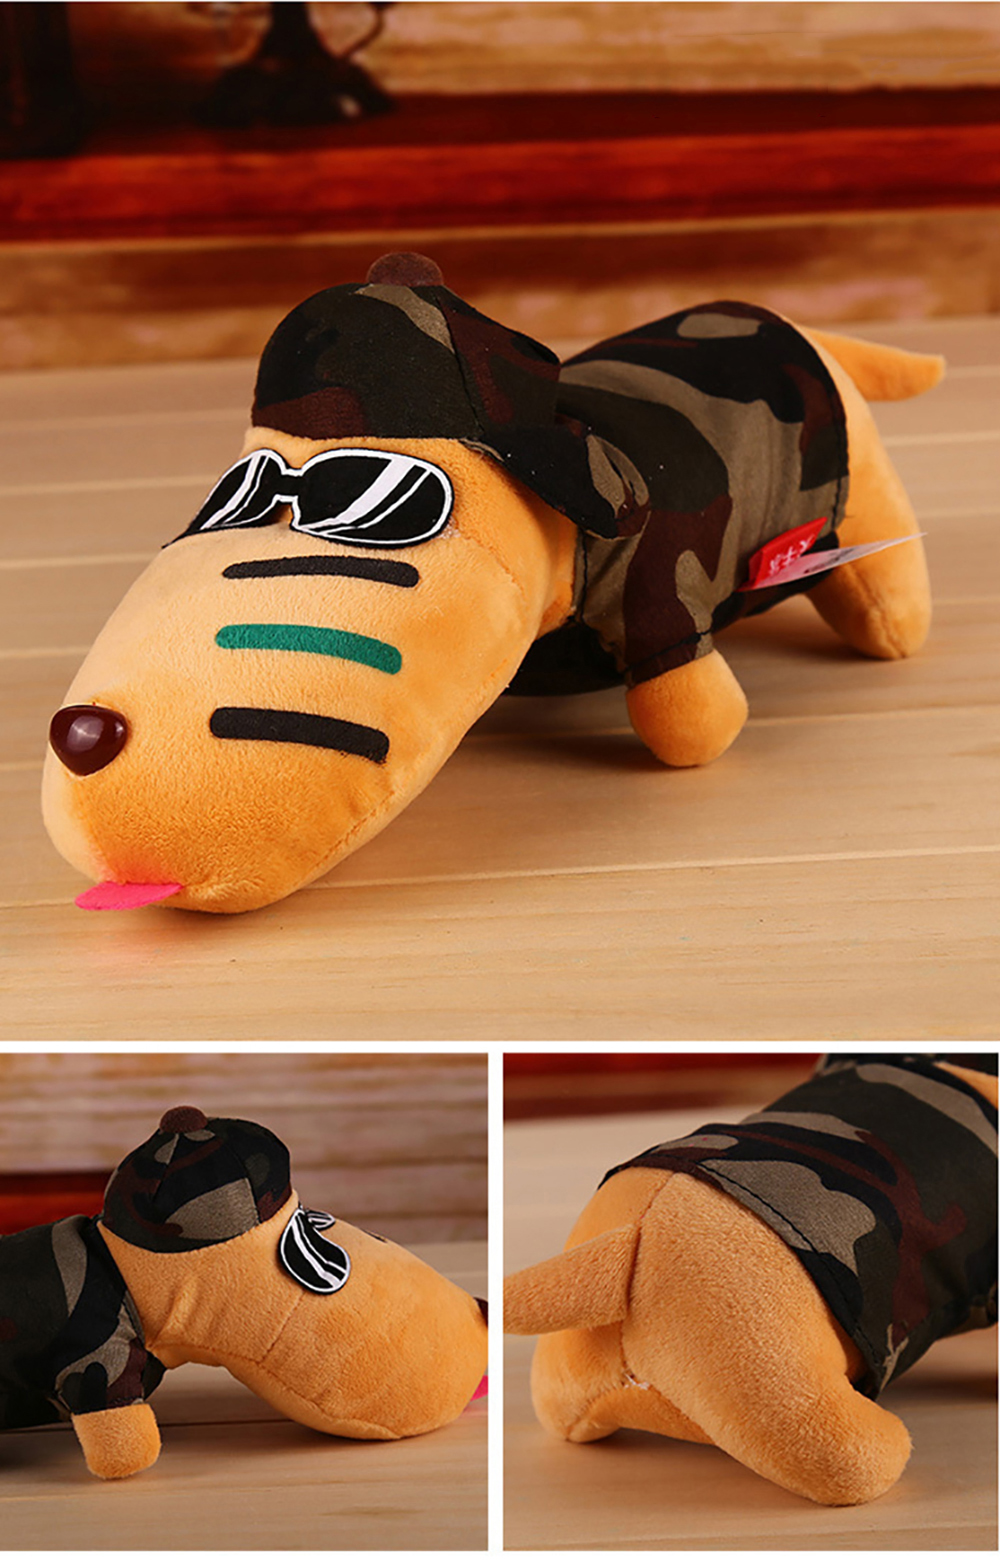 KC-Long-Mouth-Dog-Stuffed-Plush-Toy-Bubble-Particles-Bamboo-Charcoal--Car-Deodorant-Ornaments-1337762-10